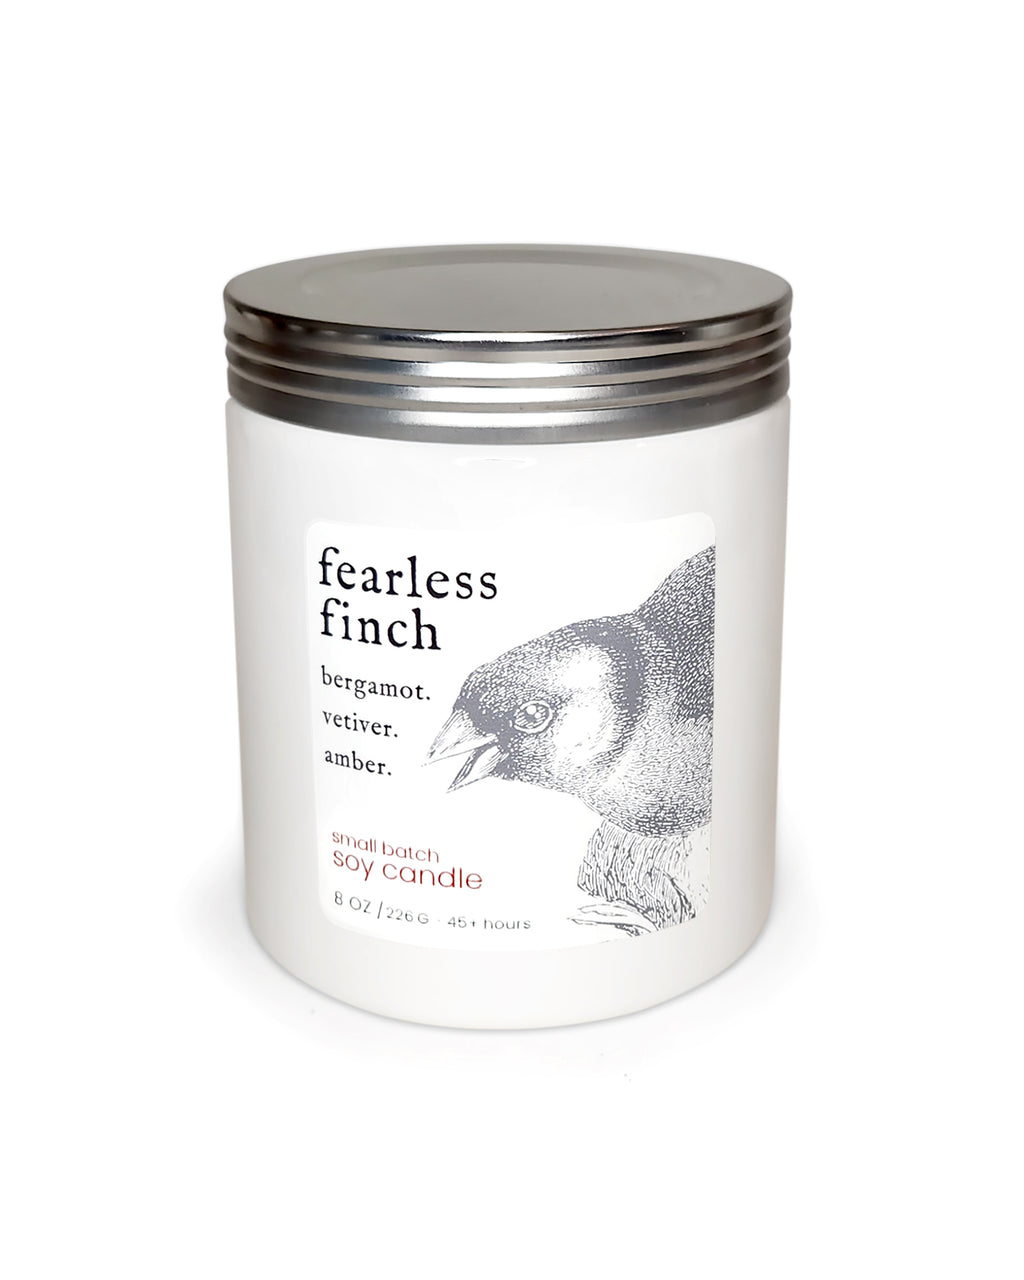 fearless finch ~ soy candle.